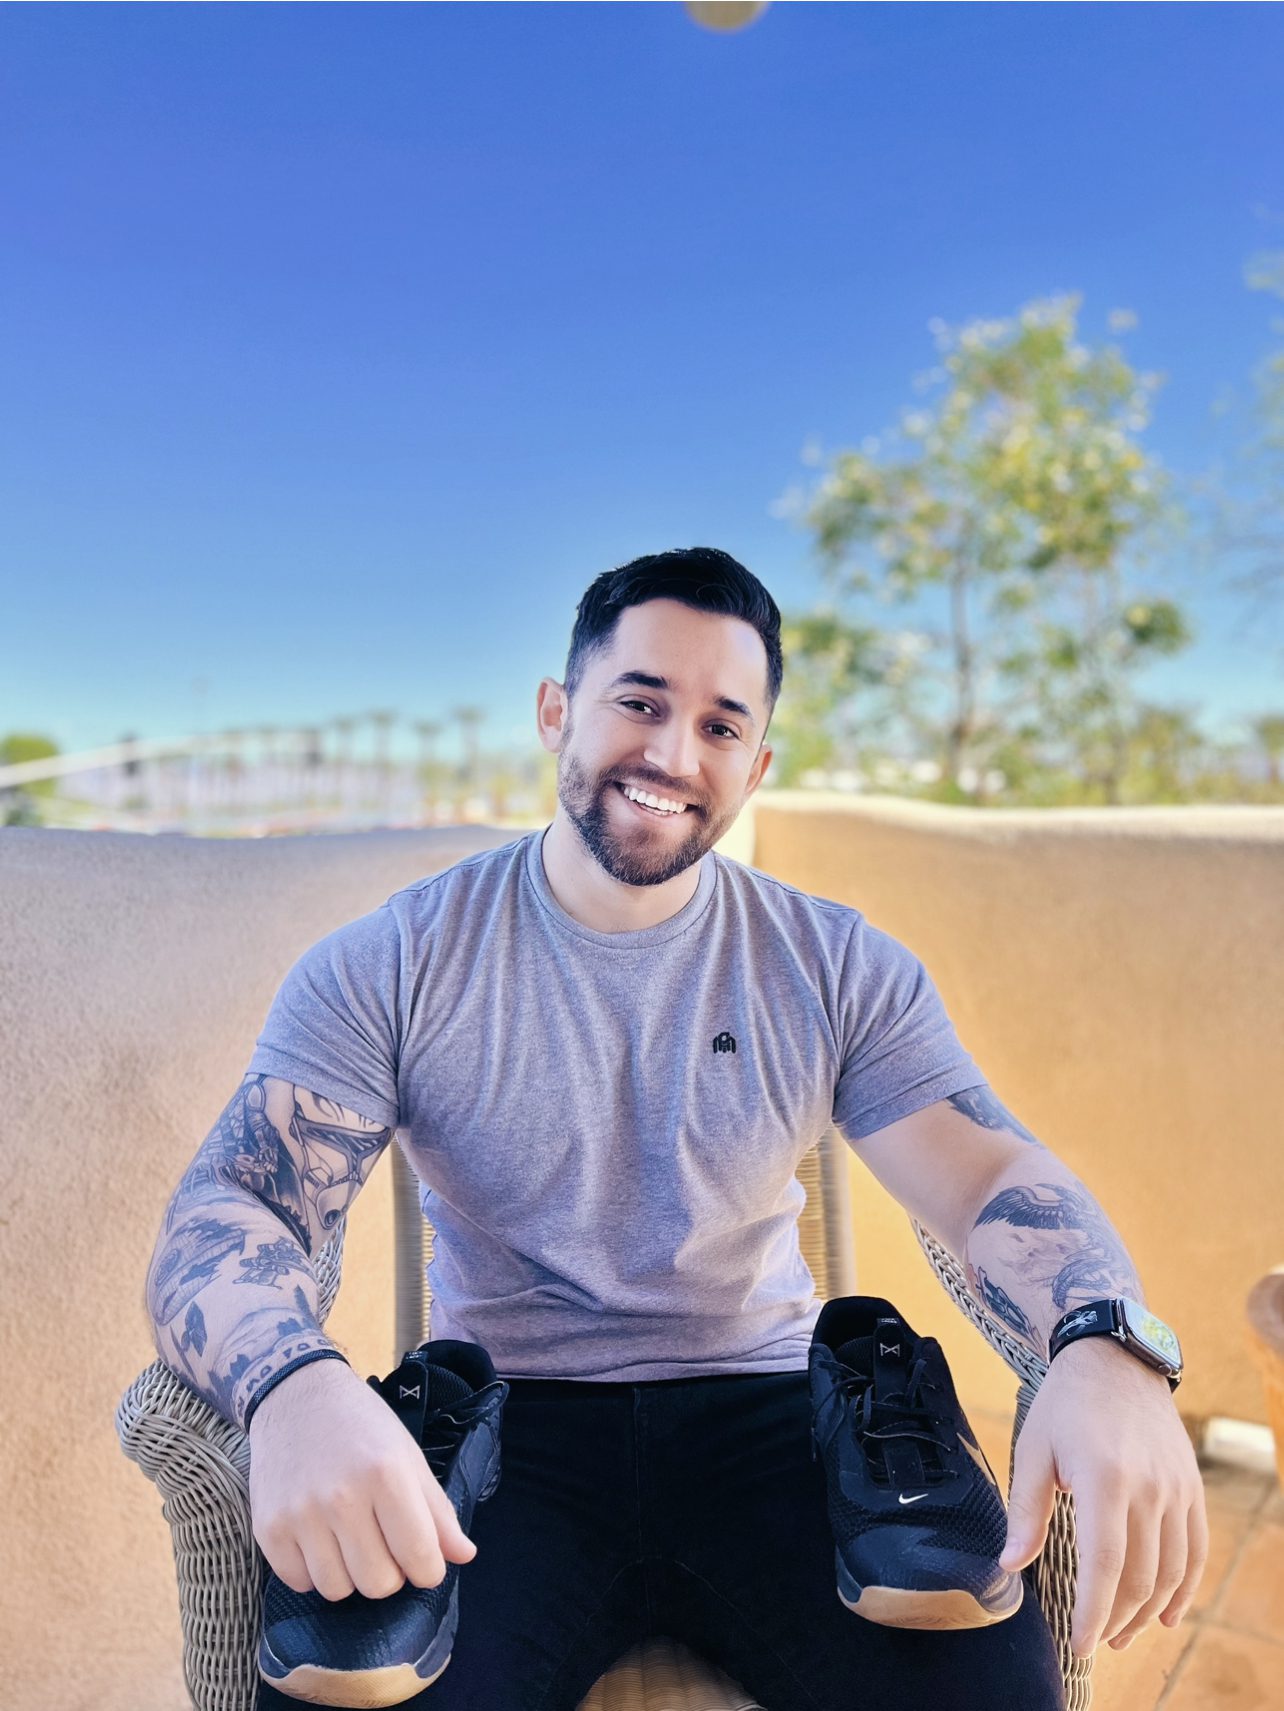 Man with tattoos sitting outdoors, holding a pair of sneakers and smiling at the camera.